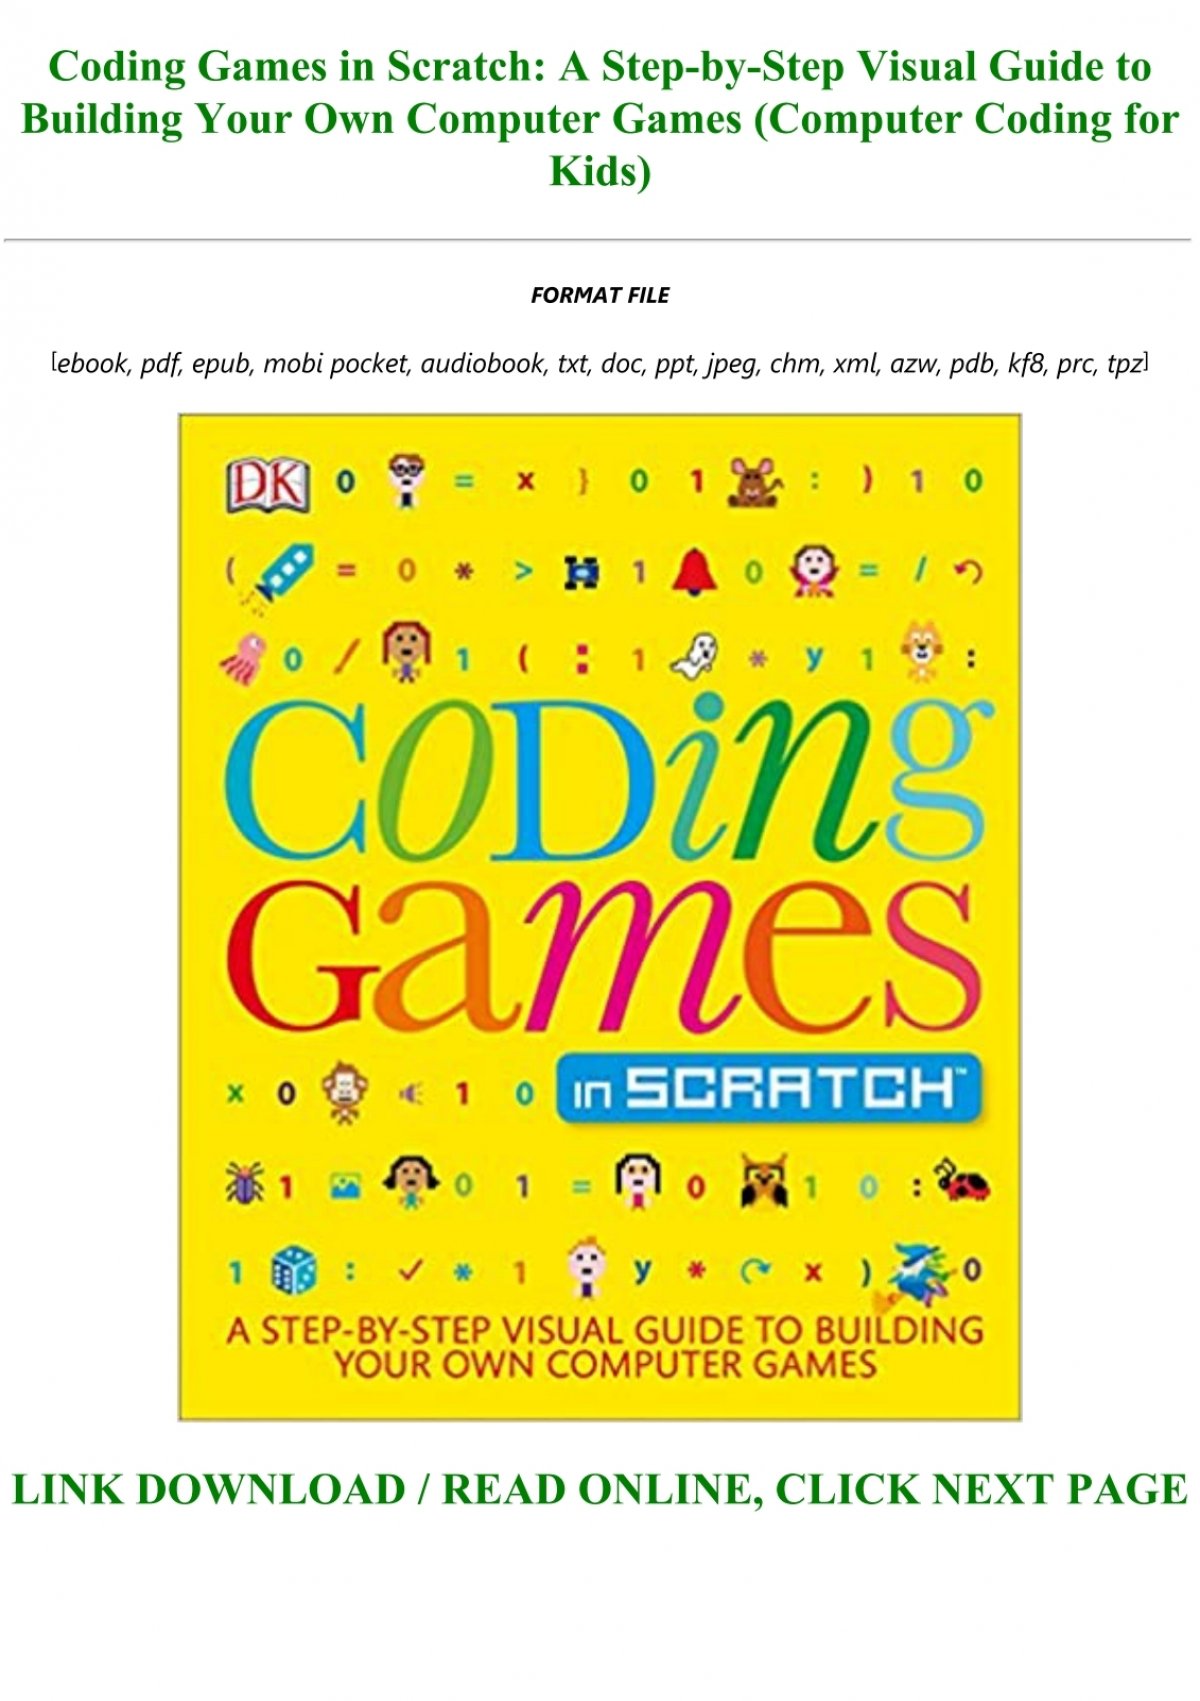 Coding Games in Scratch: A Step-by-Step Visual Guide to Building Your Own Computer Games [Book]